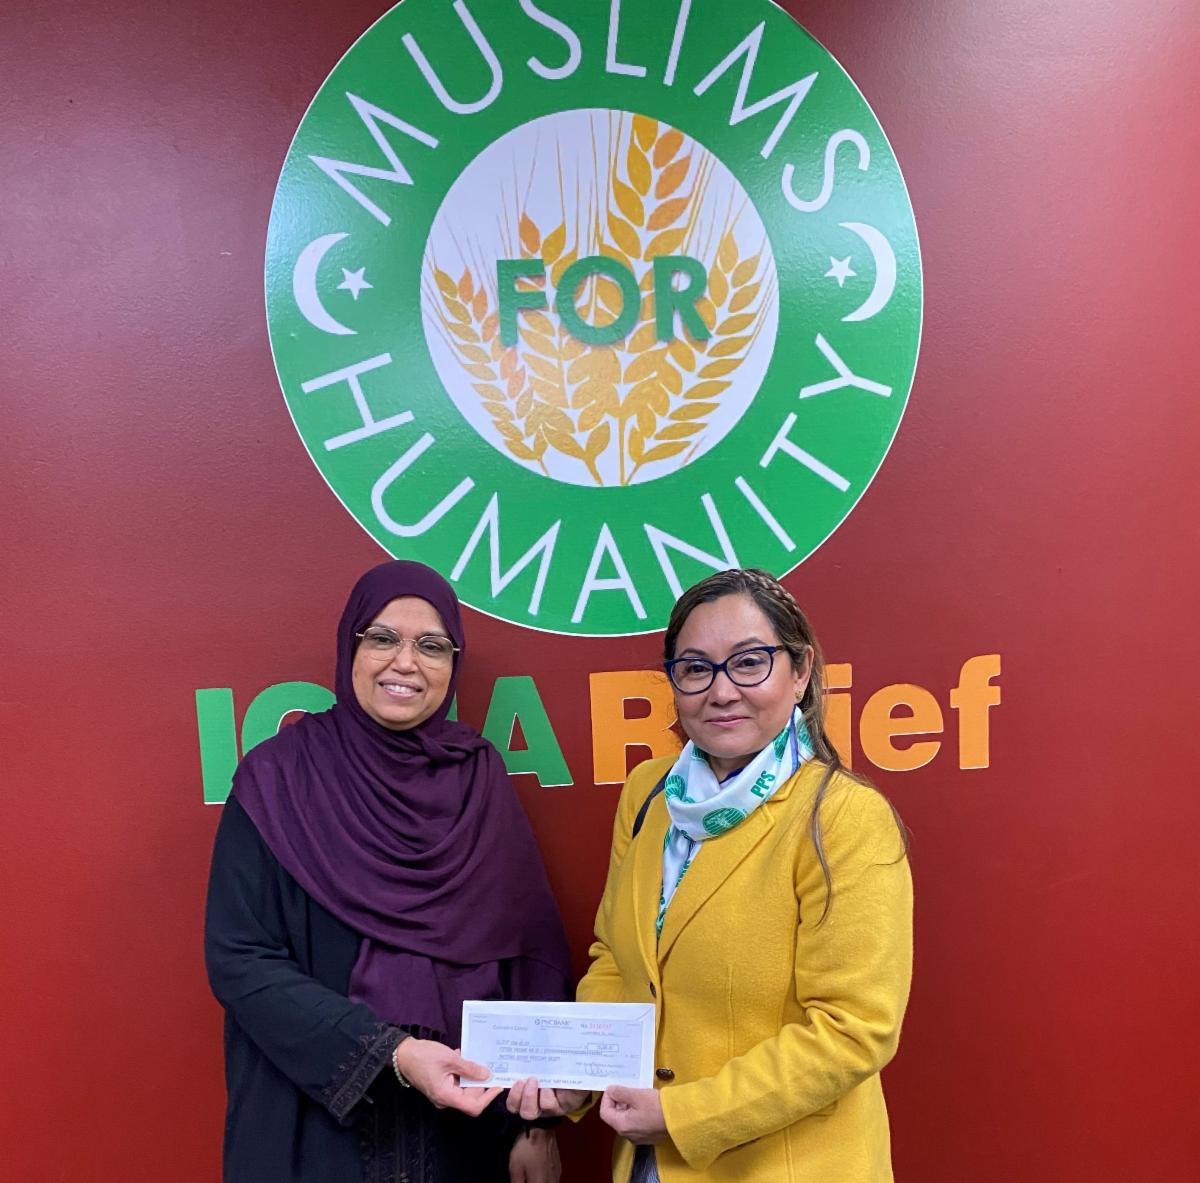 PPS DONATION FOR TELEHEALTH TO ICNA RELIEF